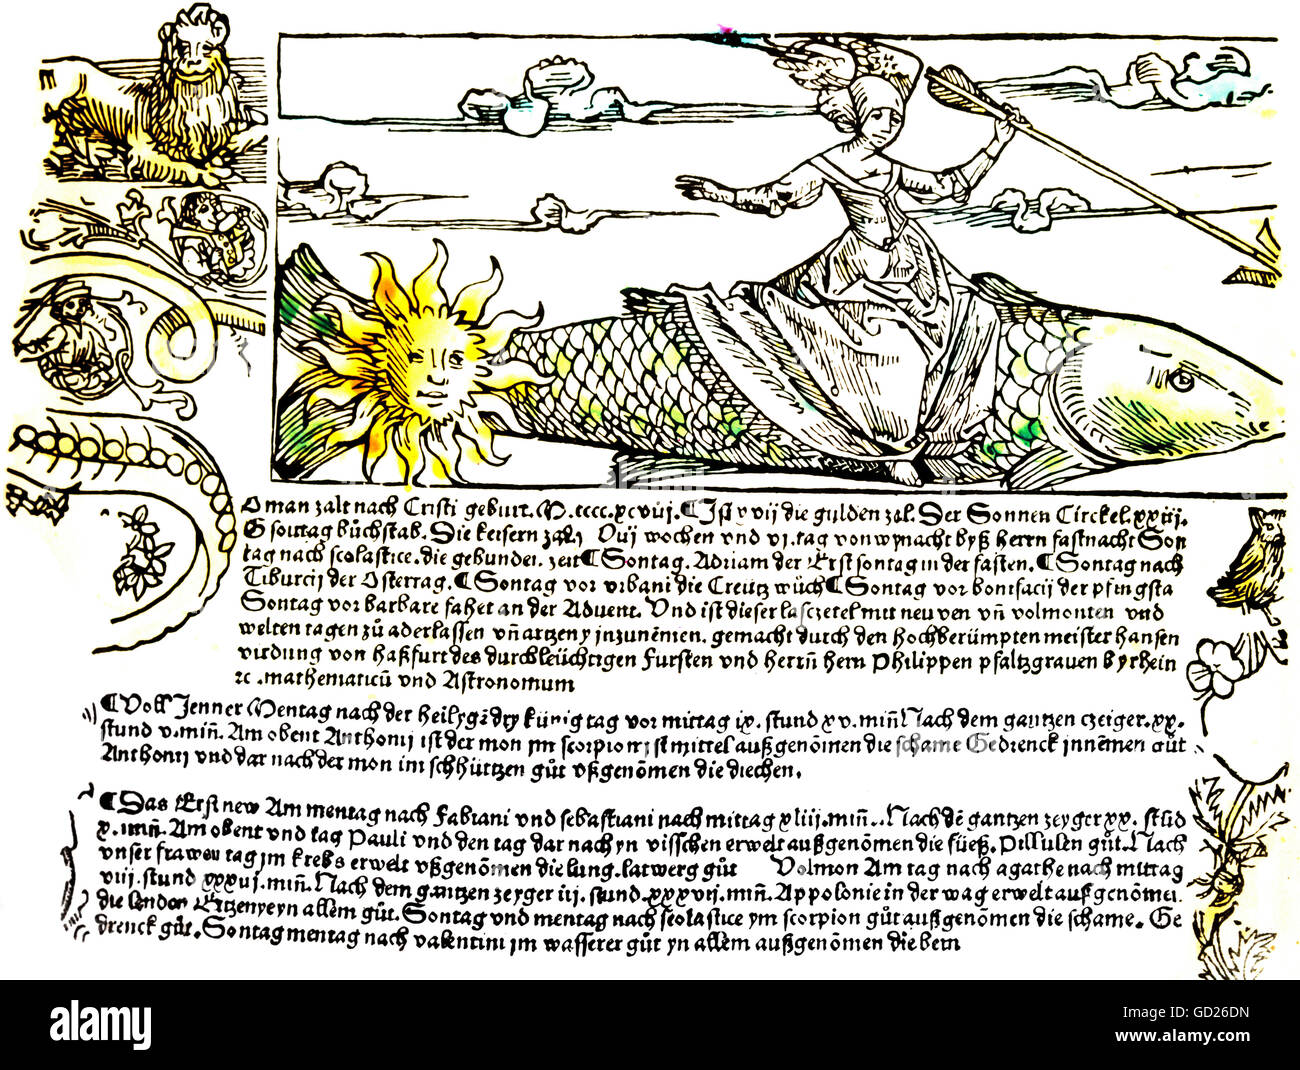 astrology, planets, Venus, in sign of fish under ascendant sun, from a German calendar, woodcut, coloured, printed by Günther Zainer, Augsburg, Germany, circa 1485, Additional-Rights-Clearences-Not Available Stock Photo